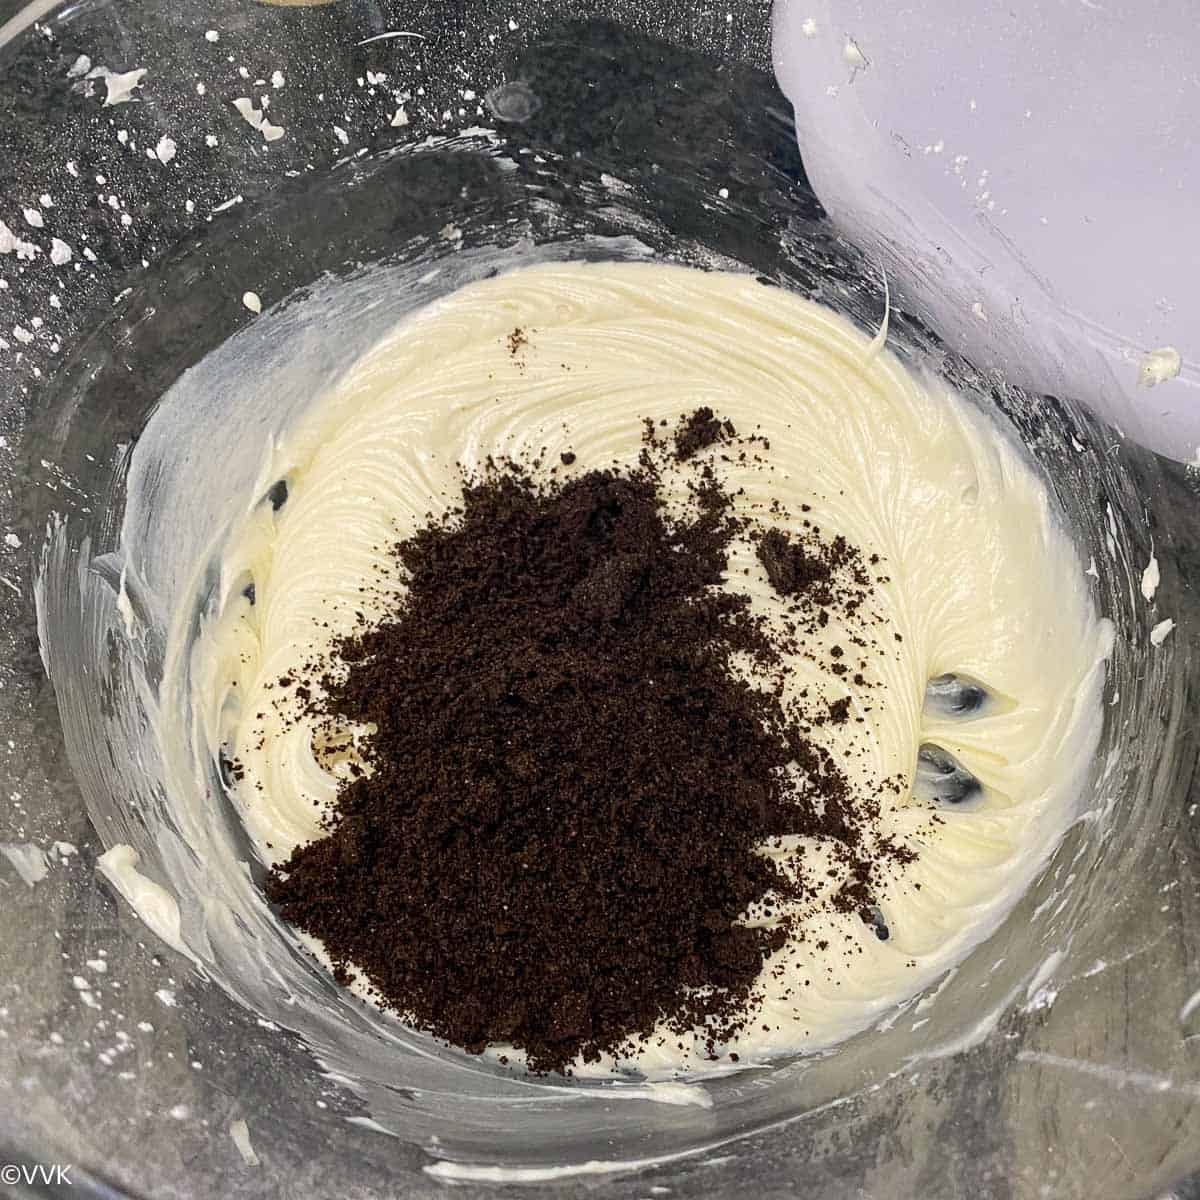 adding the crushed oreo cookies